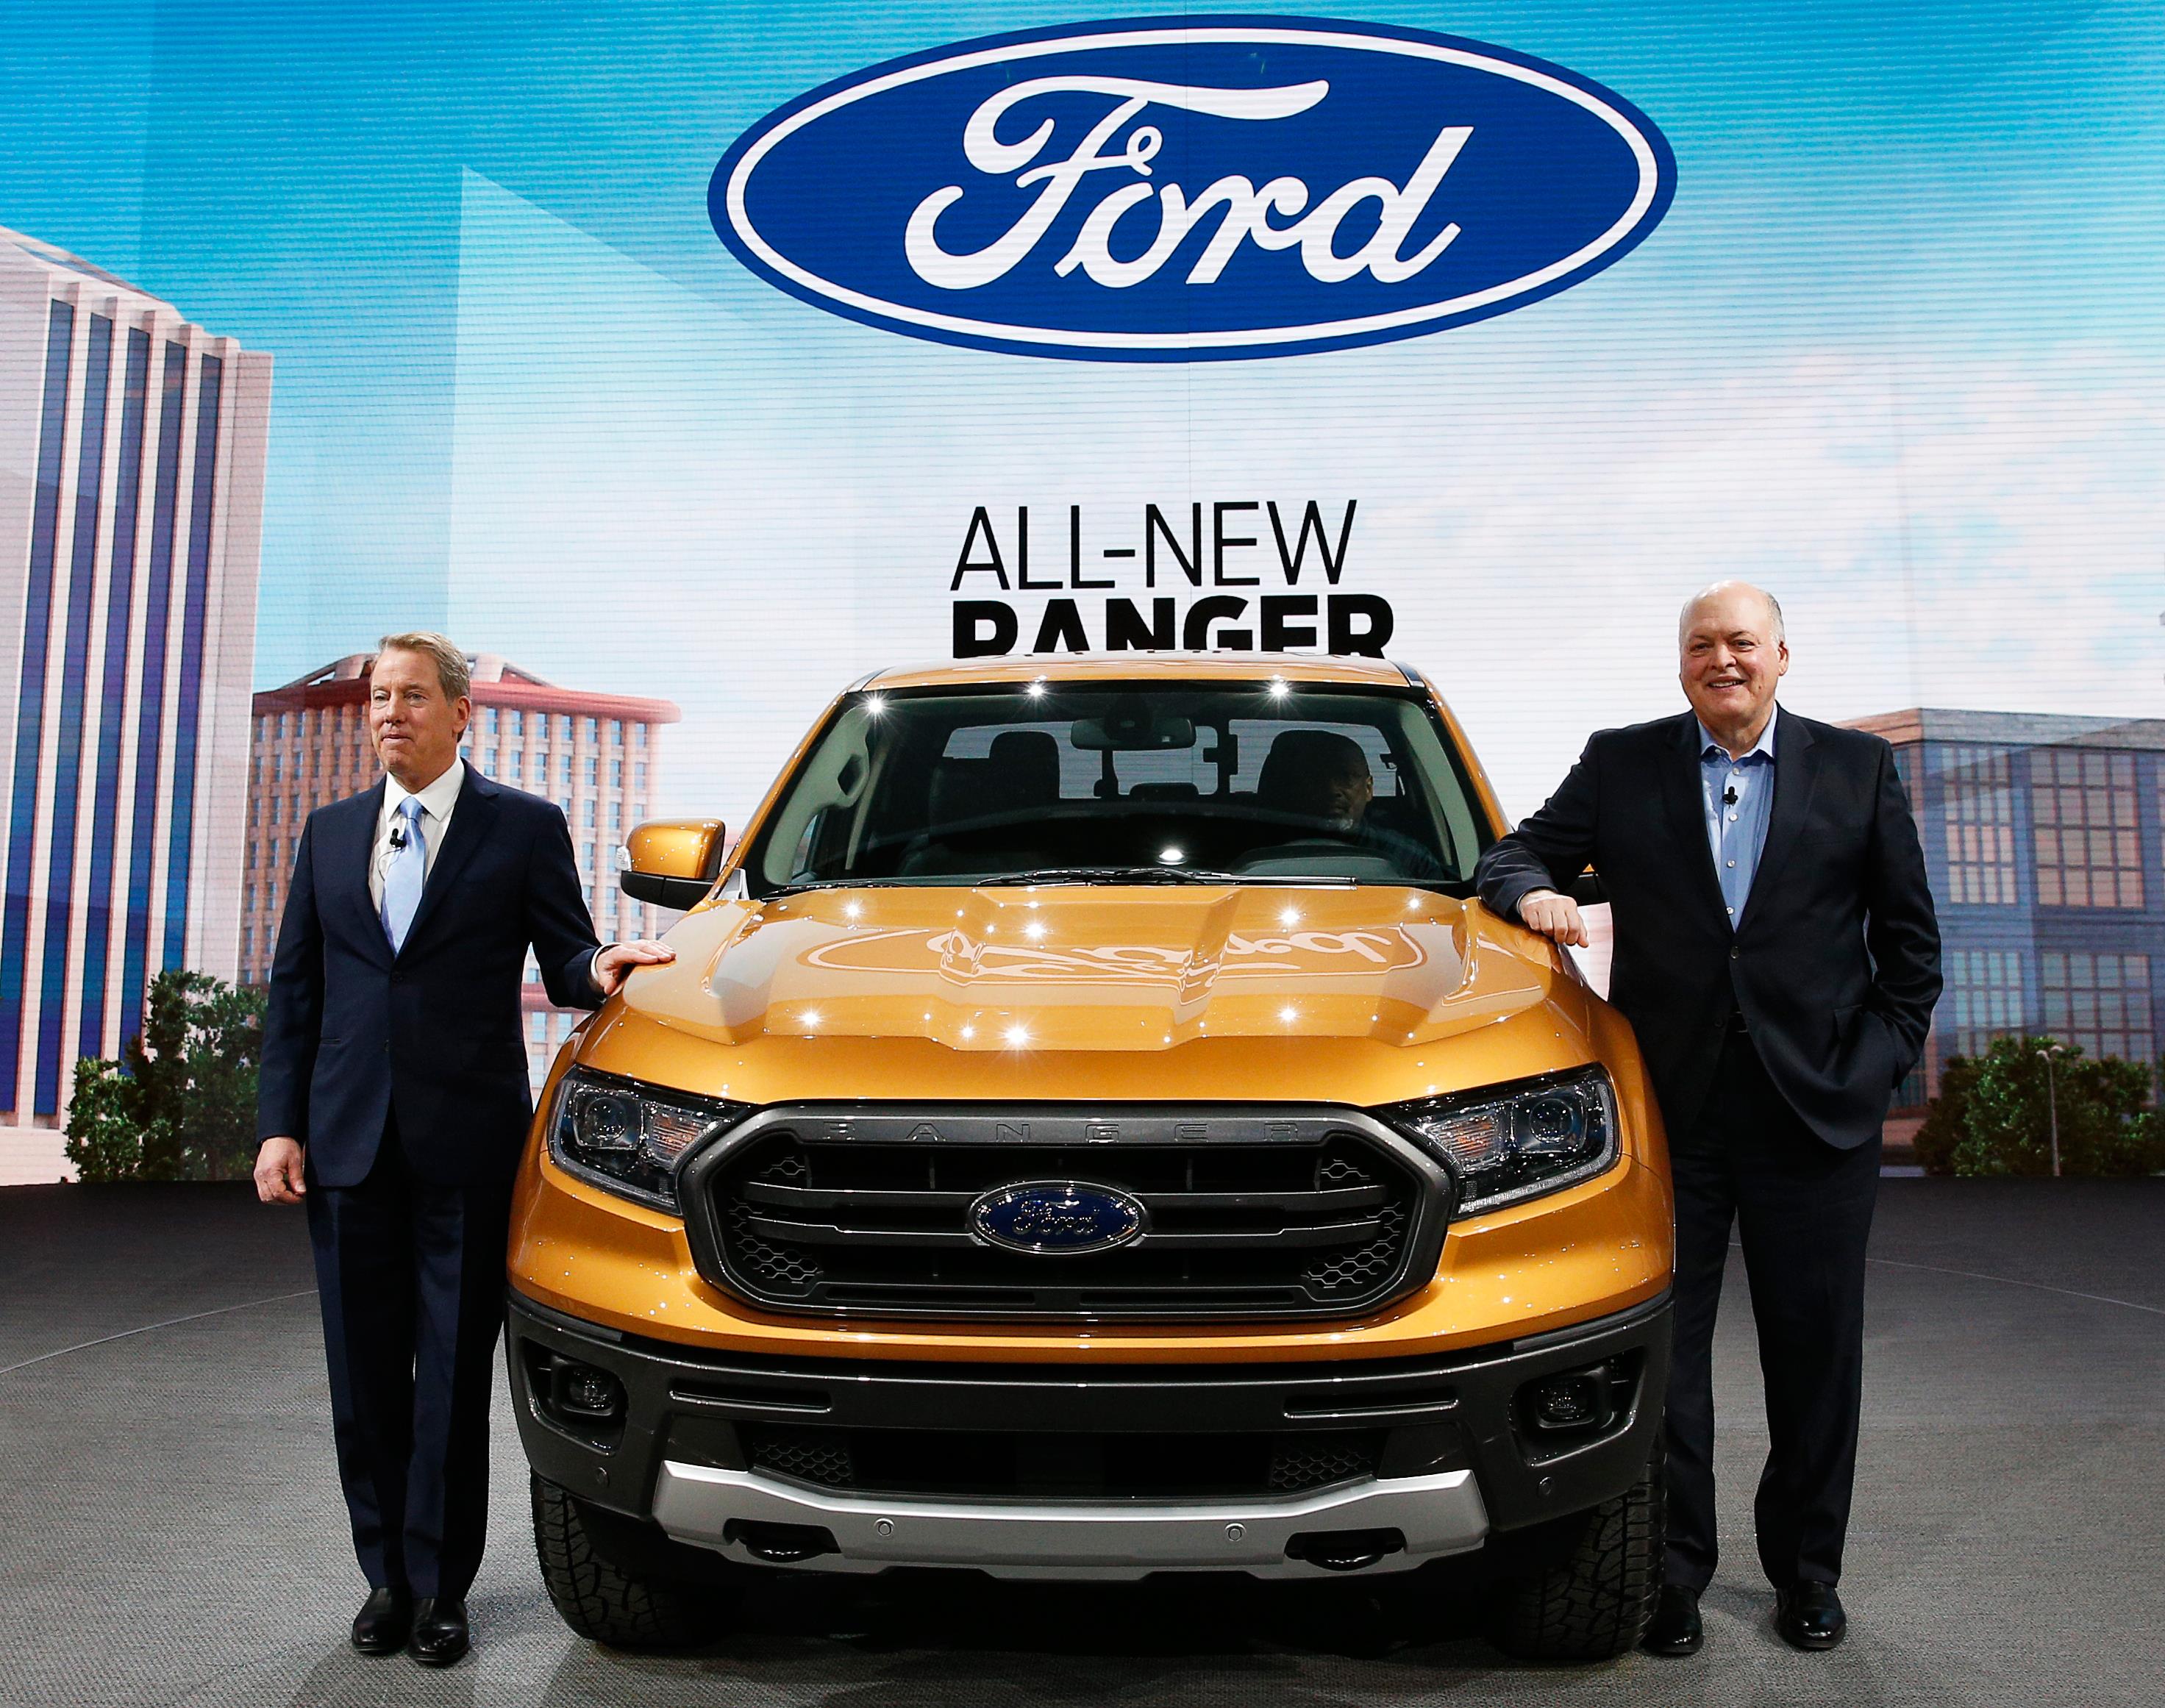 Bill Ford, executive chairman of the Ford Motor Company and Jim Hackett (R), President and CEO, present  the 2019 Ford Ranger during the Ford press preview at the North American International Auto Show in Detroit, Michigan, U.S., January 14, 2018. REUTERS/Rebecca Cook